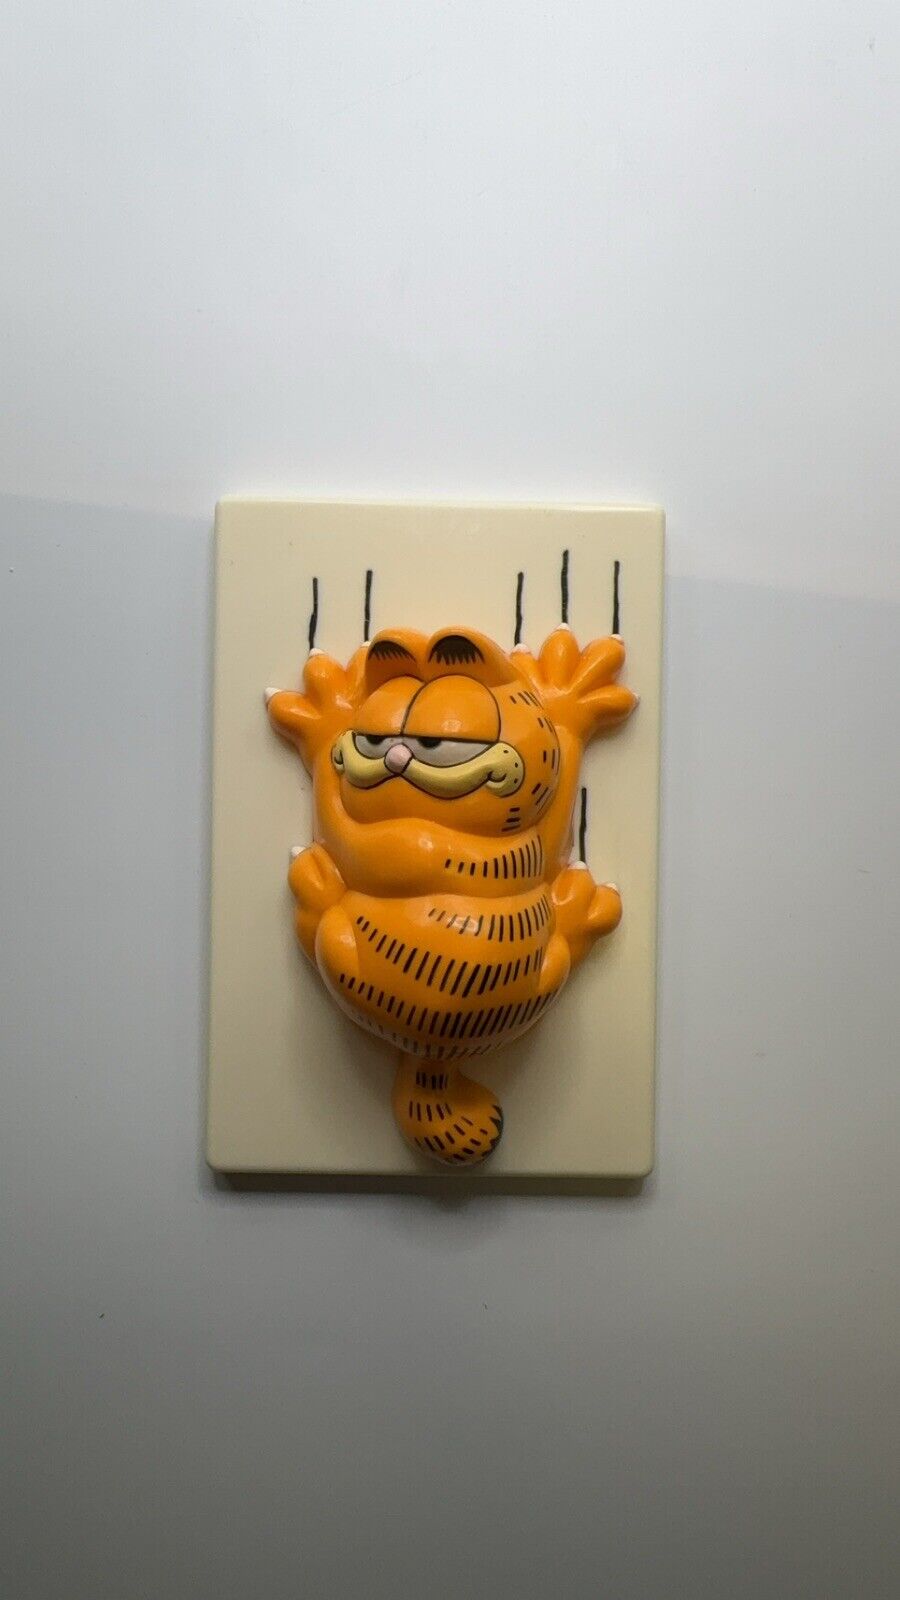 Rare Vintage 1980s Garfield Off The Wall Cat Light Switch Plate Cover